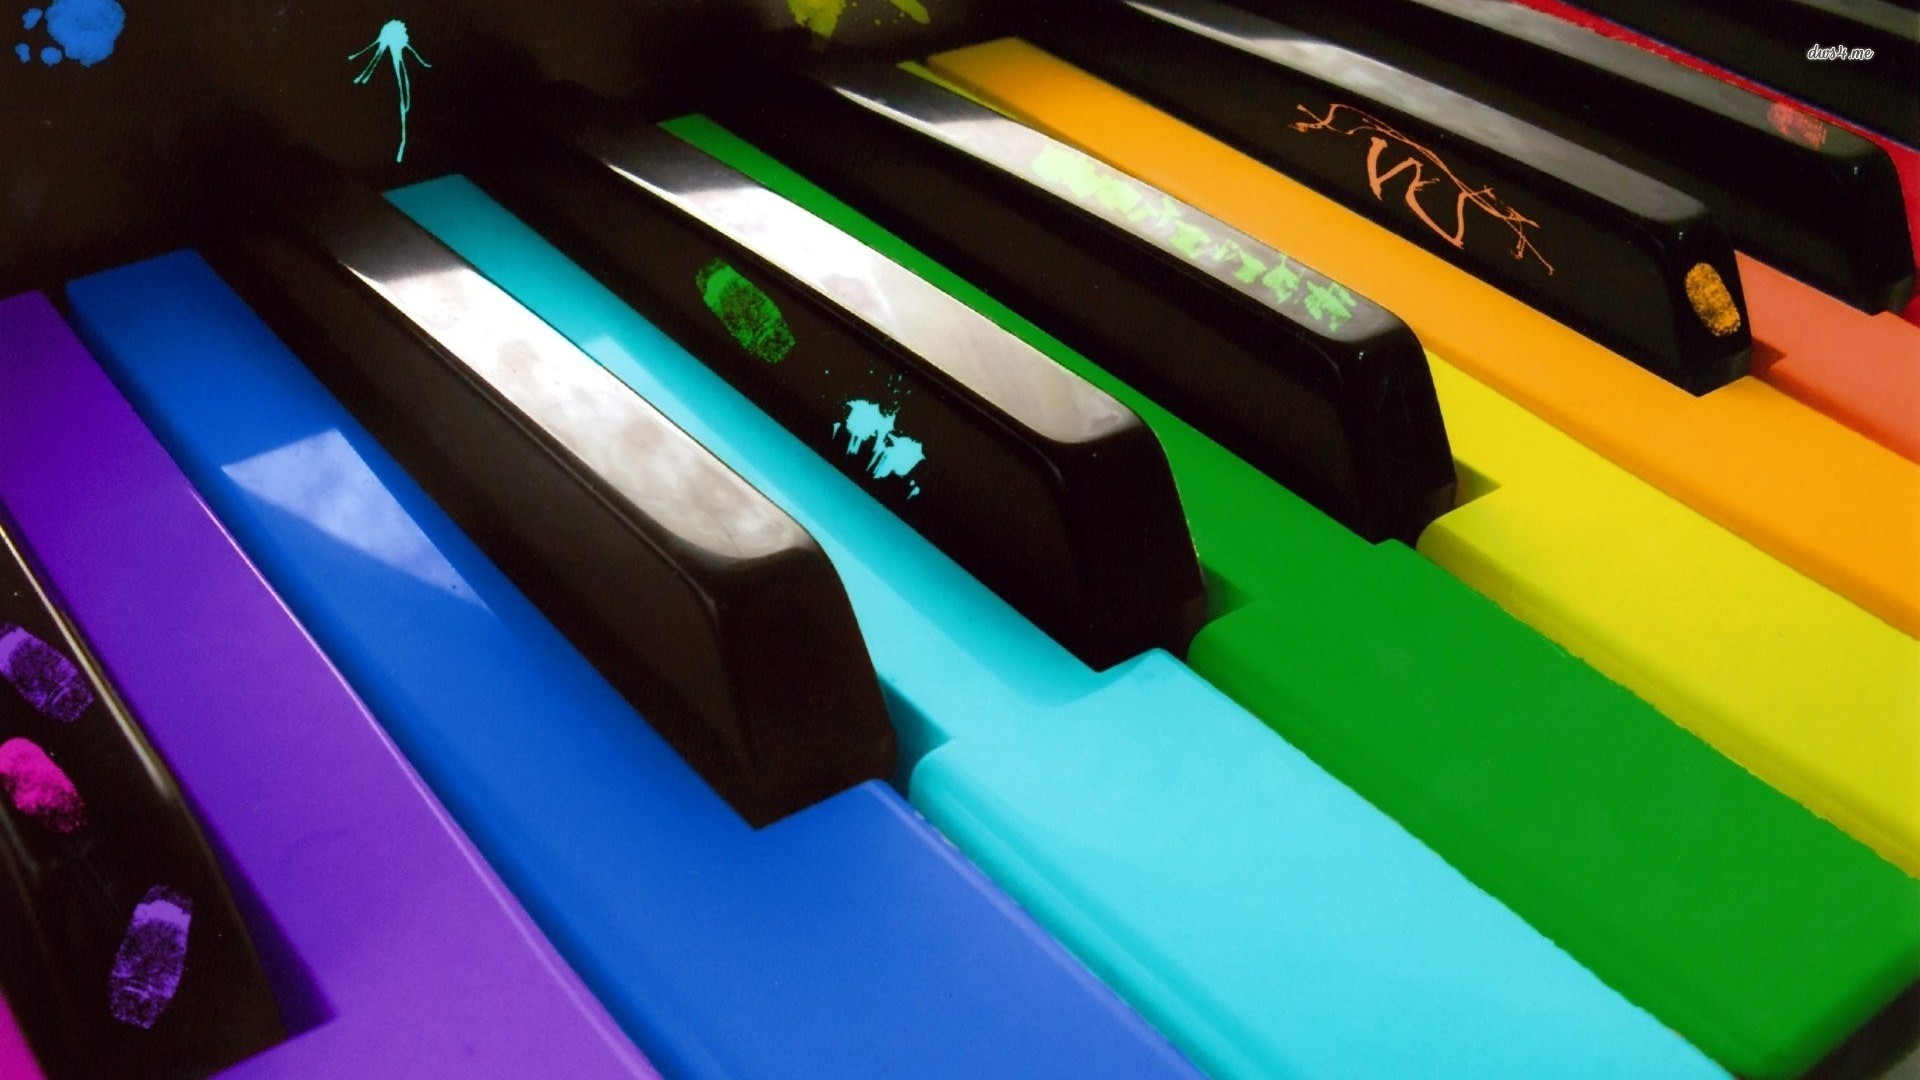 1920x1080 Colorful Keys On The Piano Wallpaper px